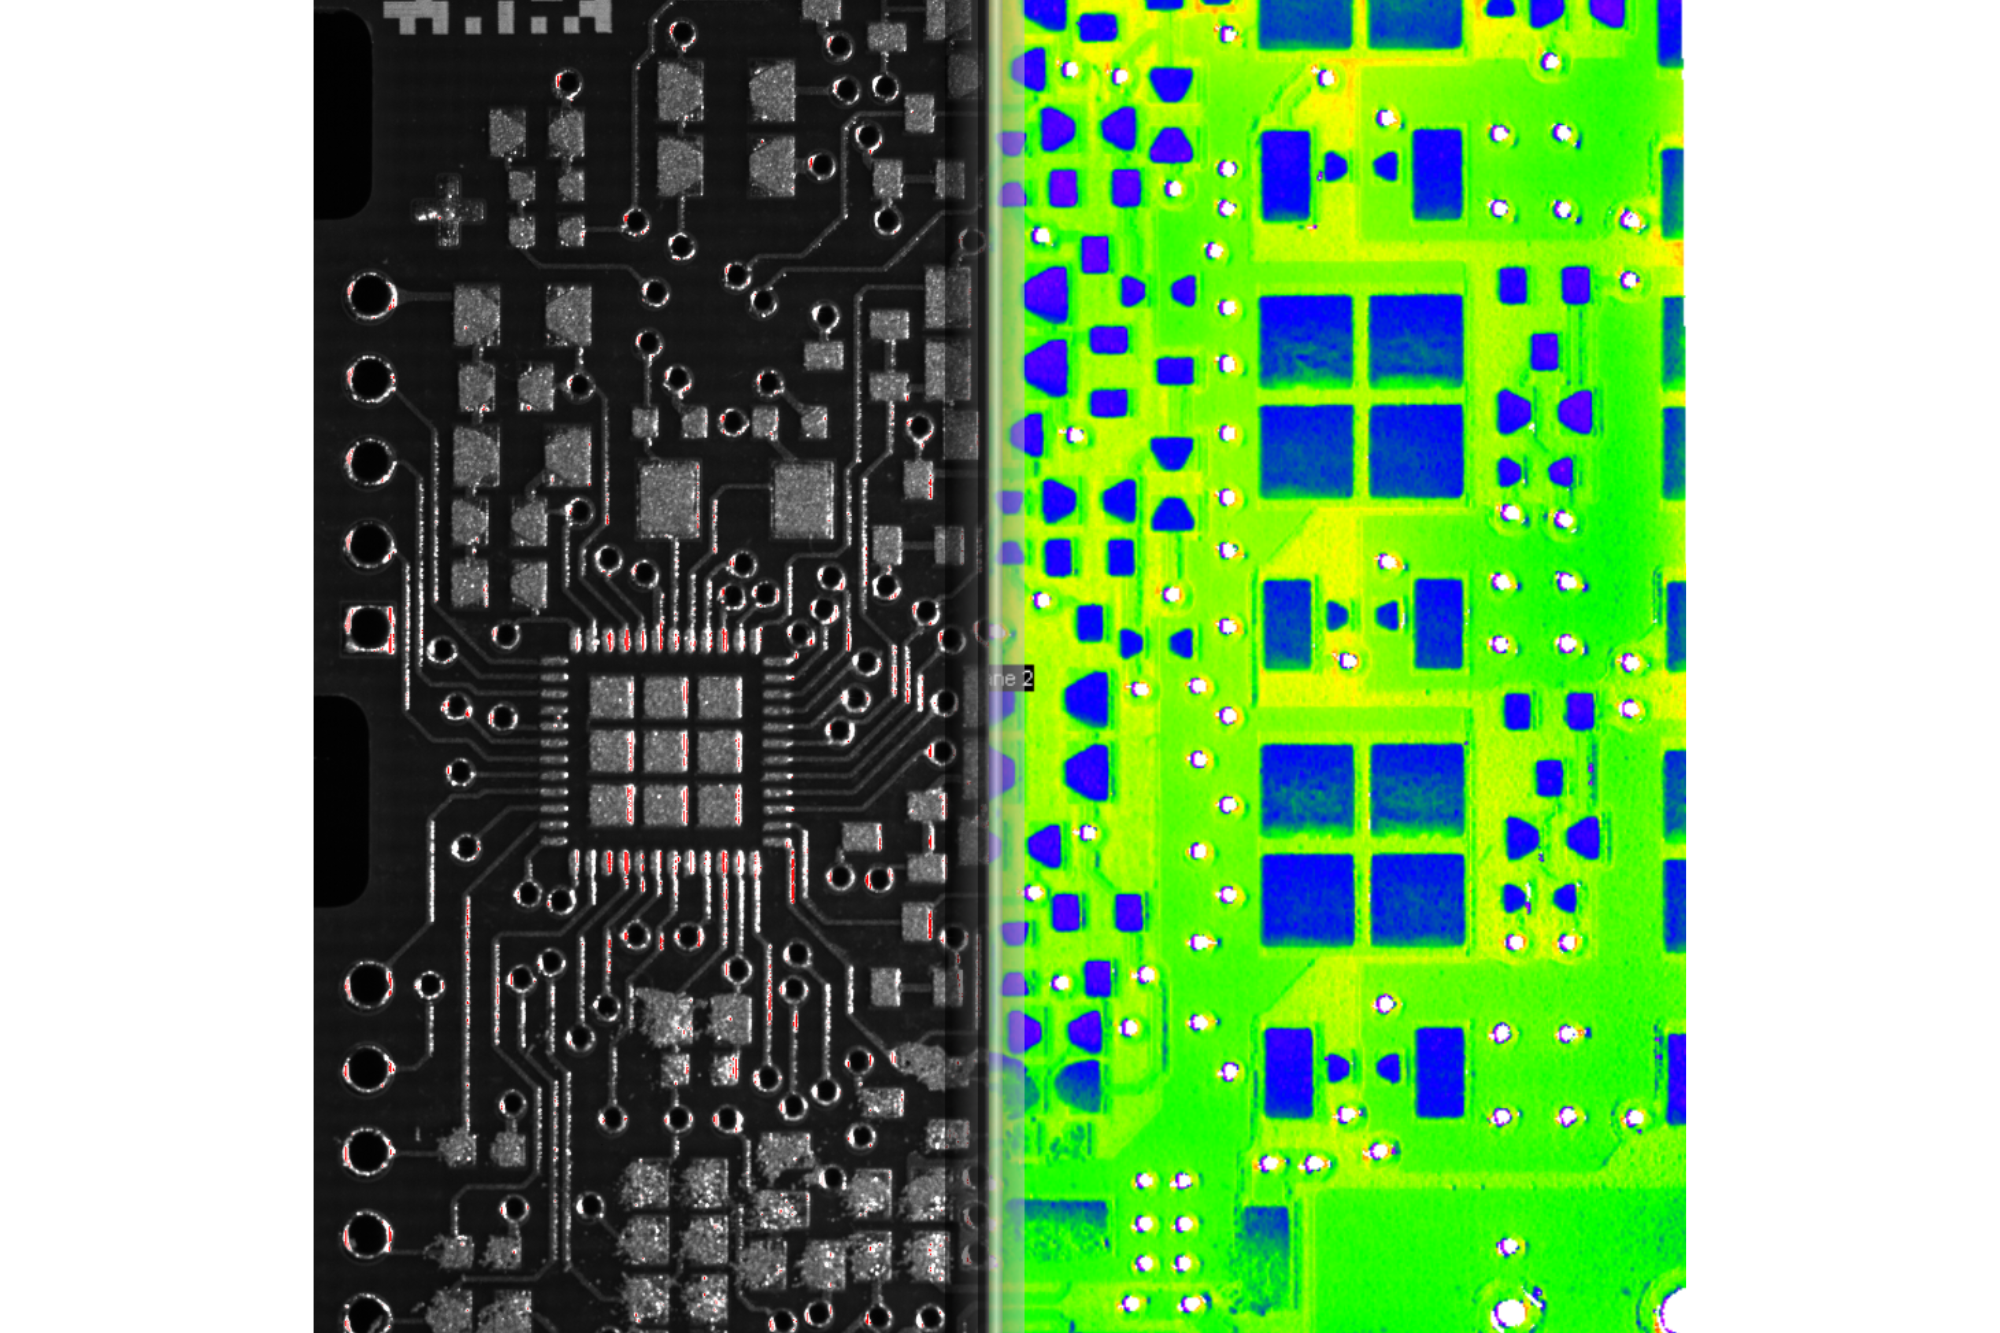 Printed circuit board (left), measurement result of the applied solder paste with color-coded height values (right)